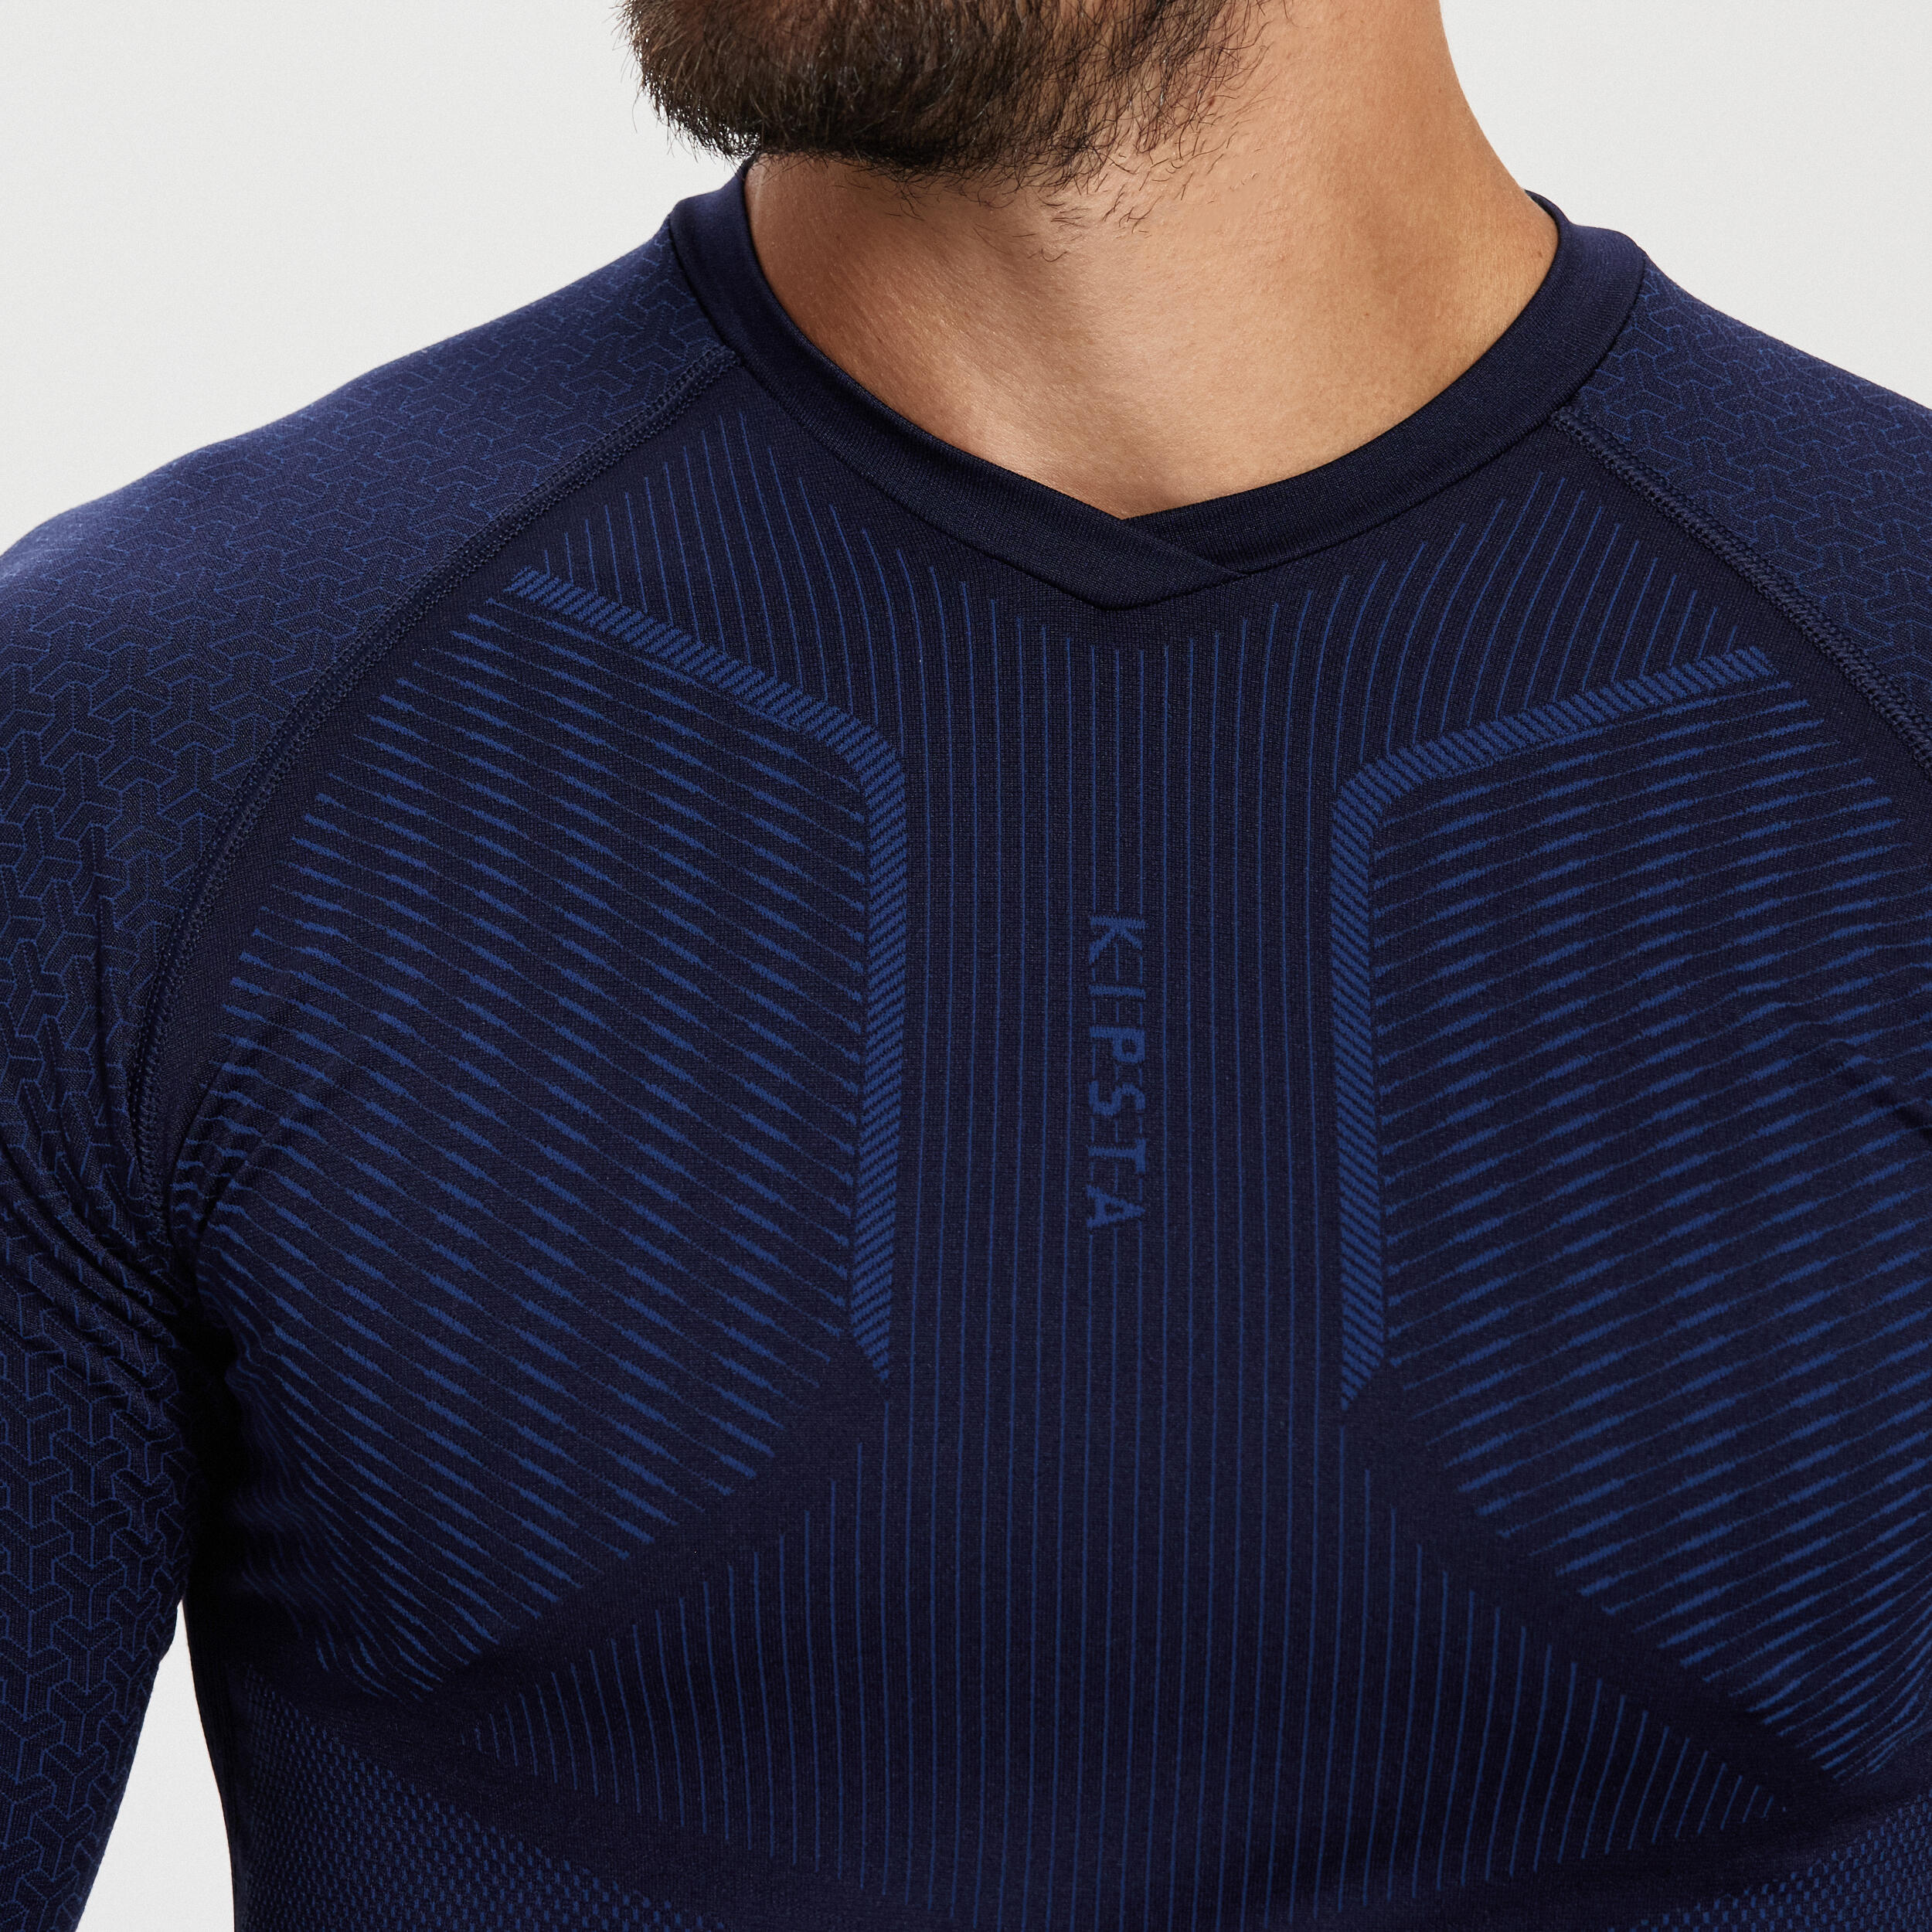 Adult Long-Sleeved Thermal Base Layer Top Keepdry 500 - Navy Blue 5/14